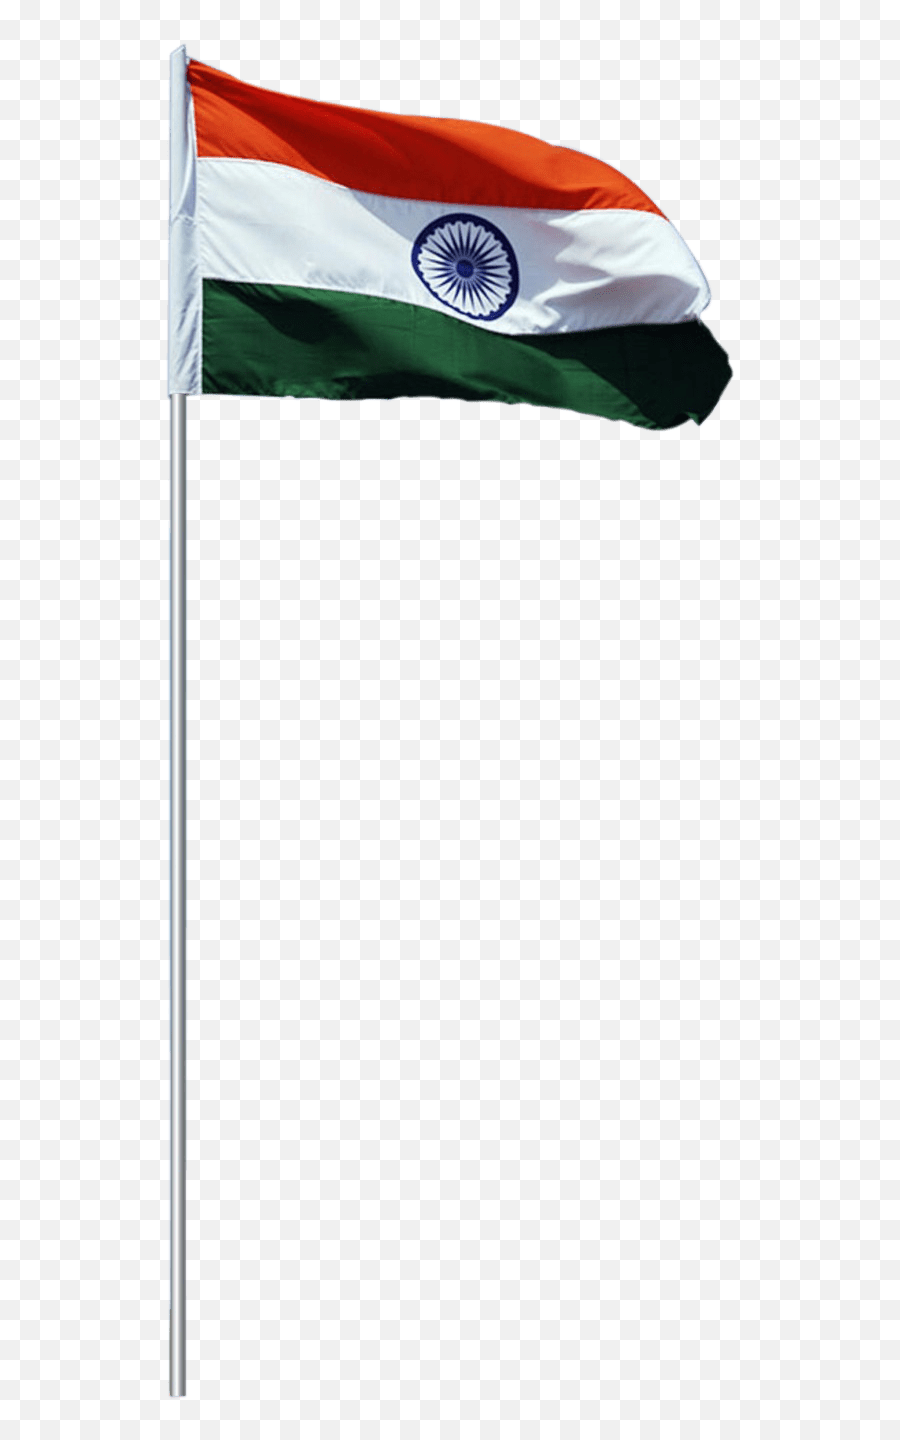 Pin - Republic Day Png Background,Indian Flag Png